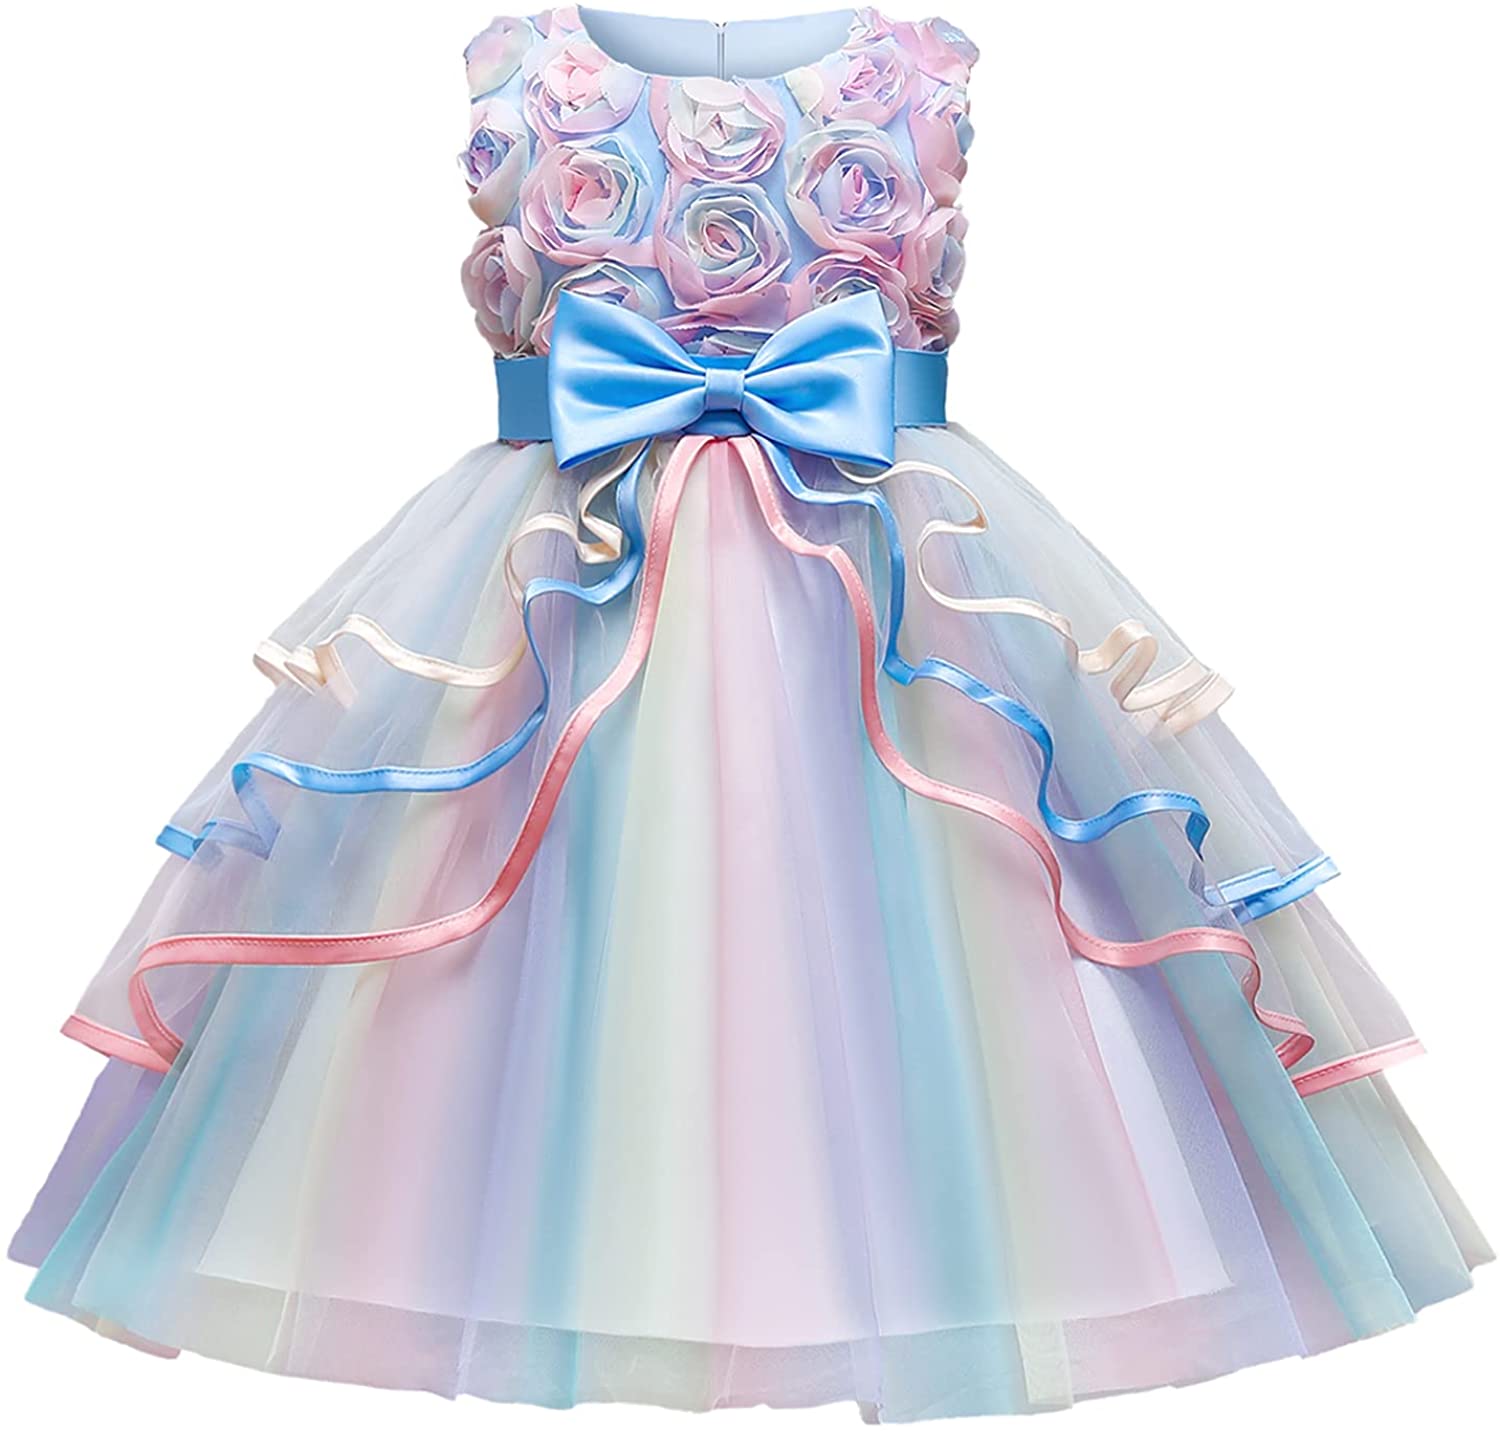 NNJXD Girl Dress Kids Ruffles Lace Party Wedding Gown Rainbow Tulle